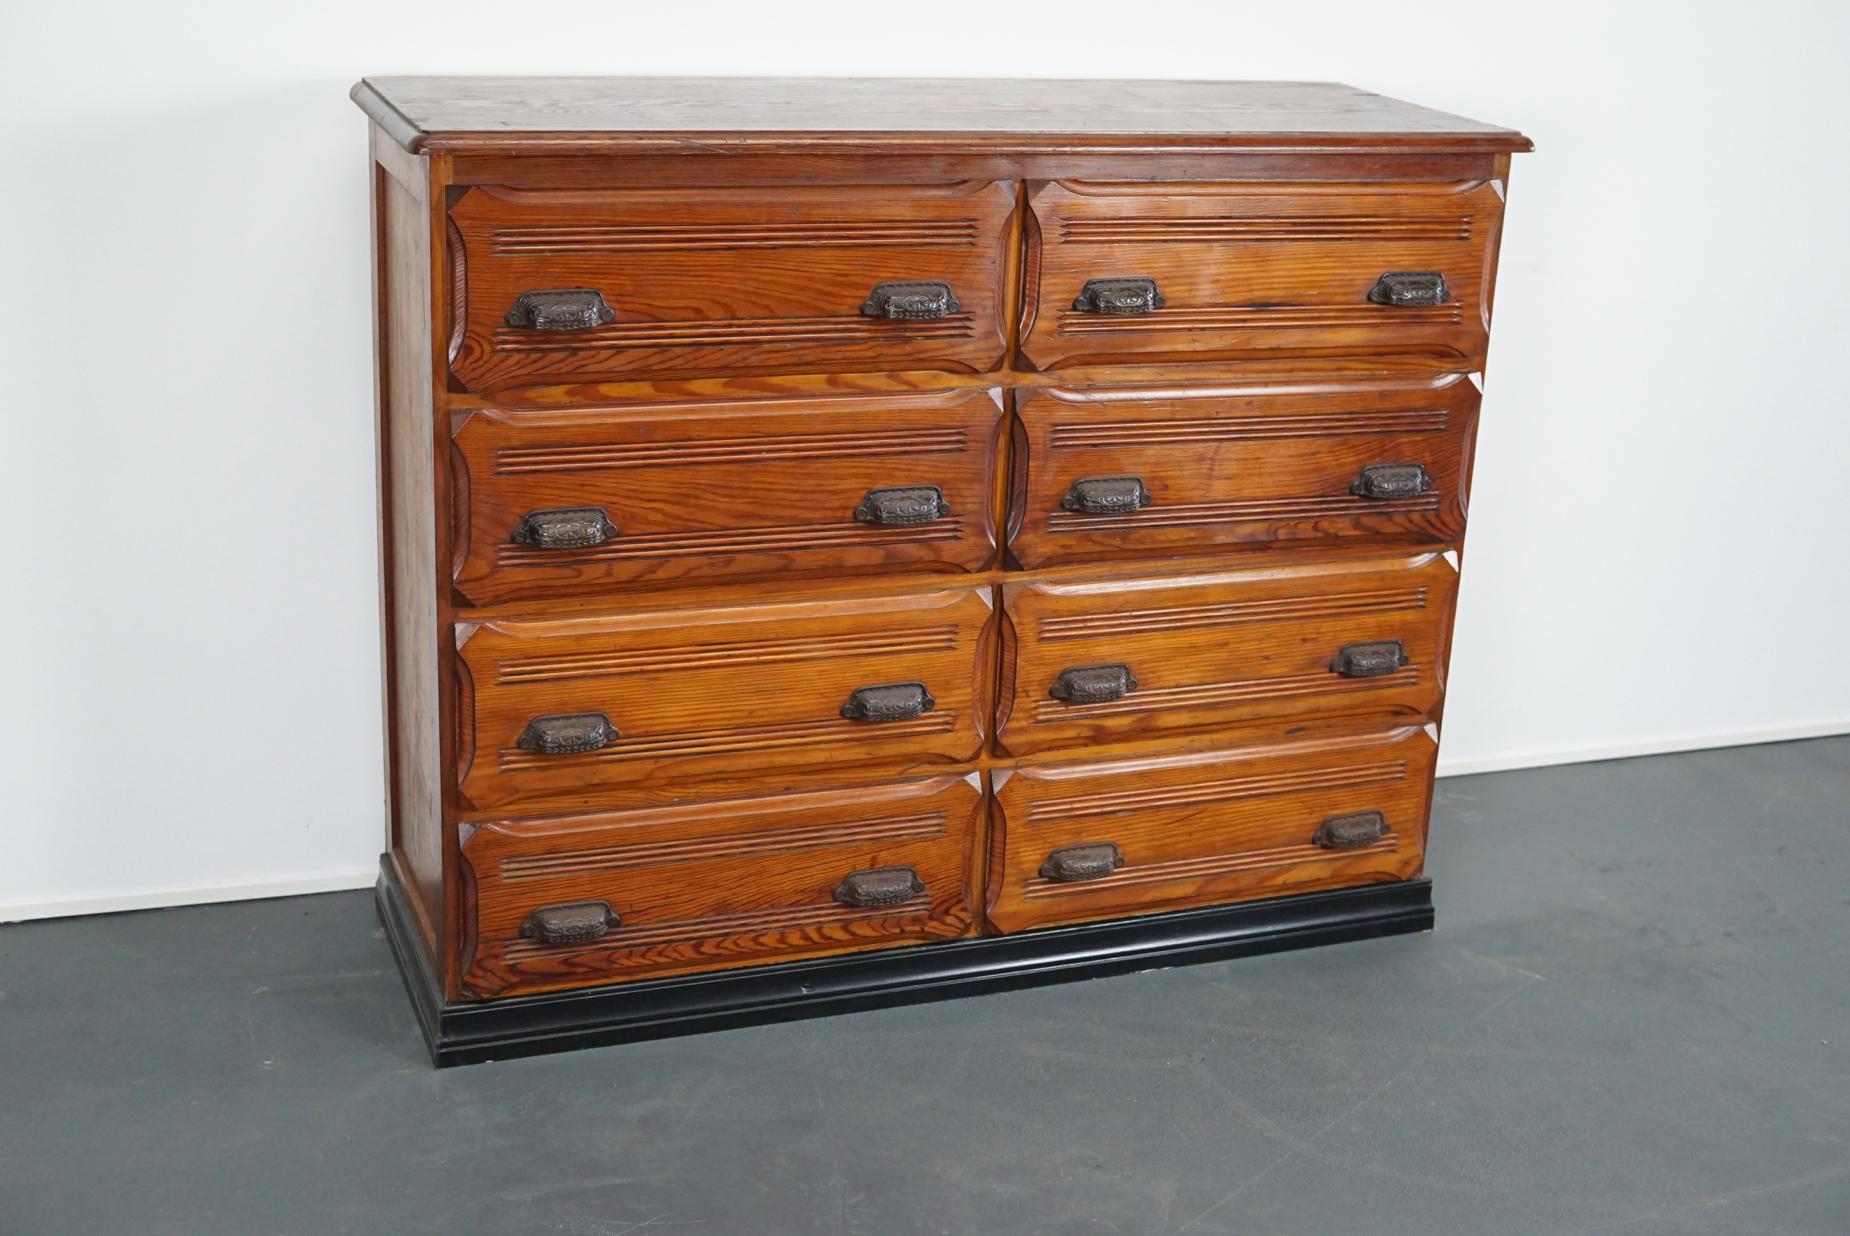 This vintage drawer cabinet originates from France. It is made from pine and features 8 large drawers. It is restored and the drawers open and shut smoothly. The inside of the drawers measure 35 x 53 x 16cm.